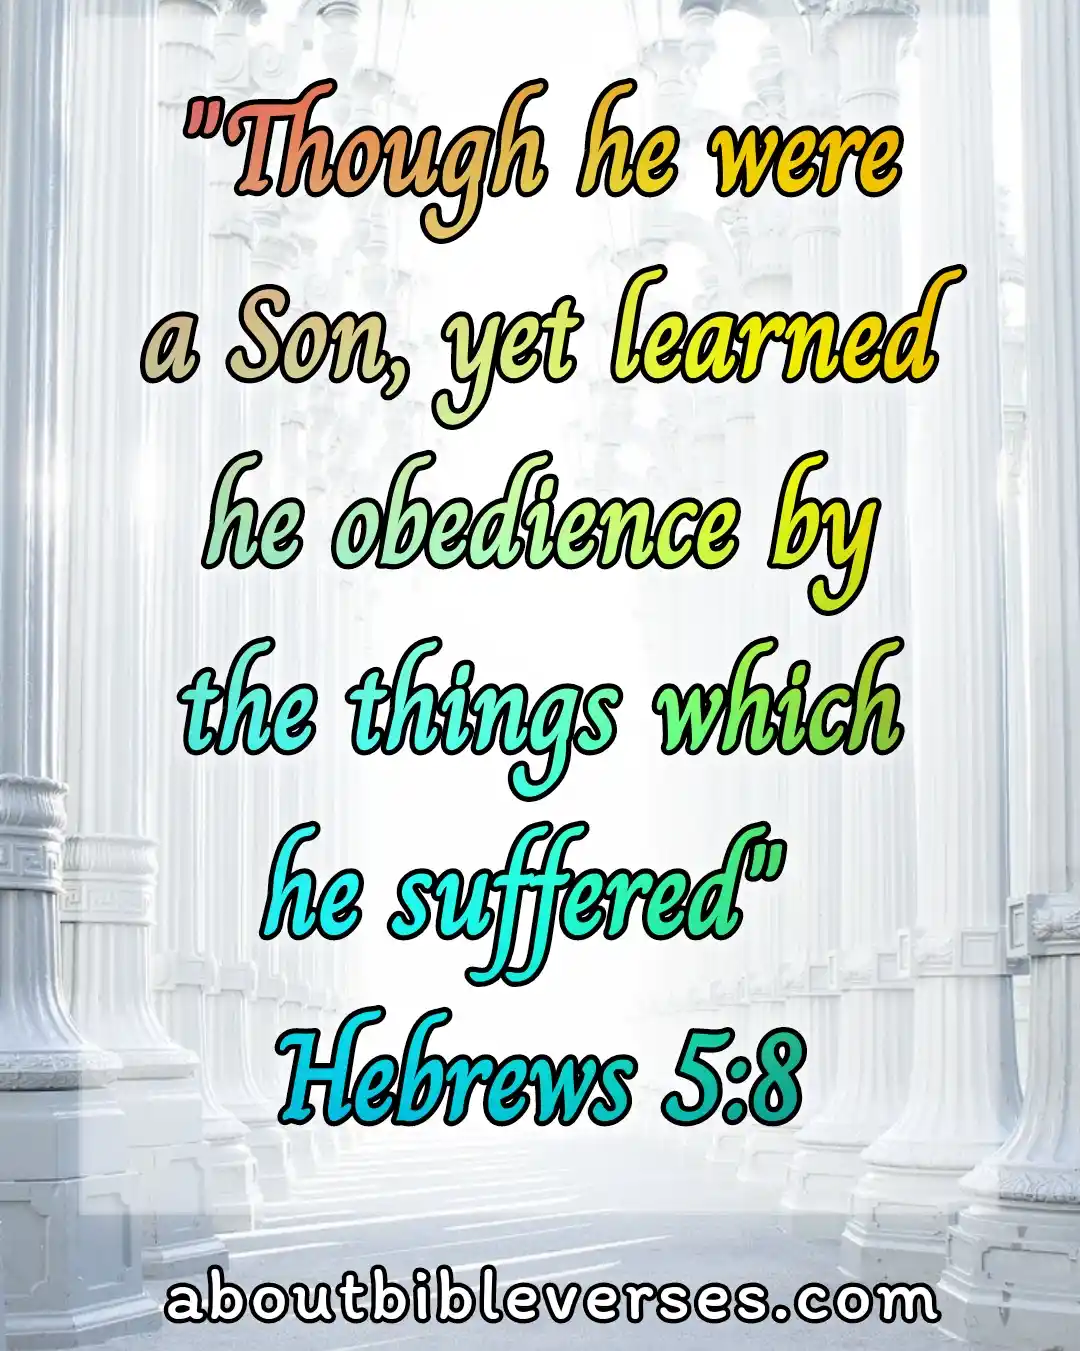 bible verses about Obedience (Hebrews 5:8)